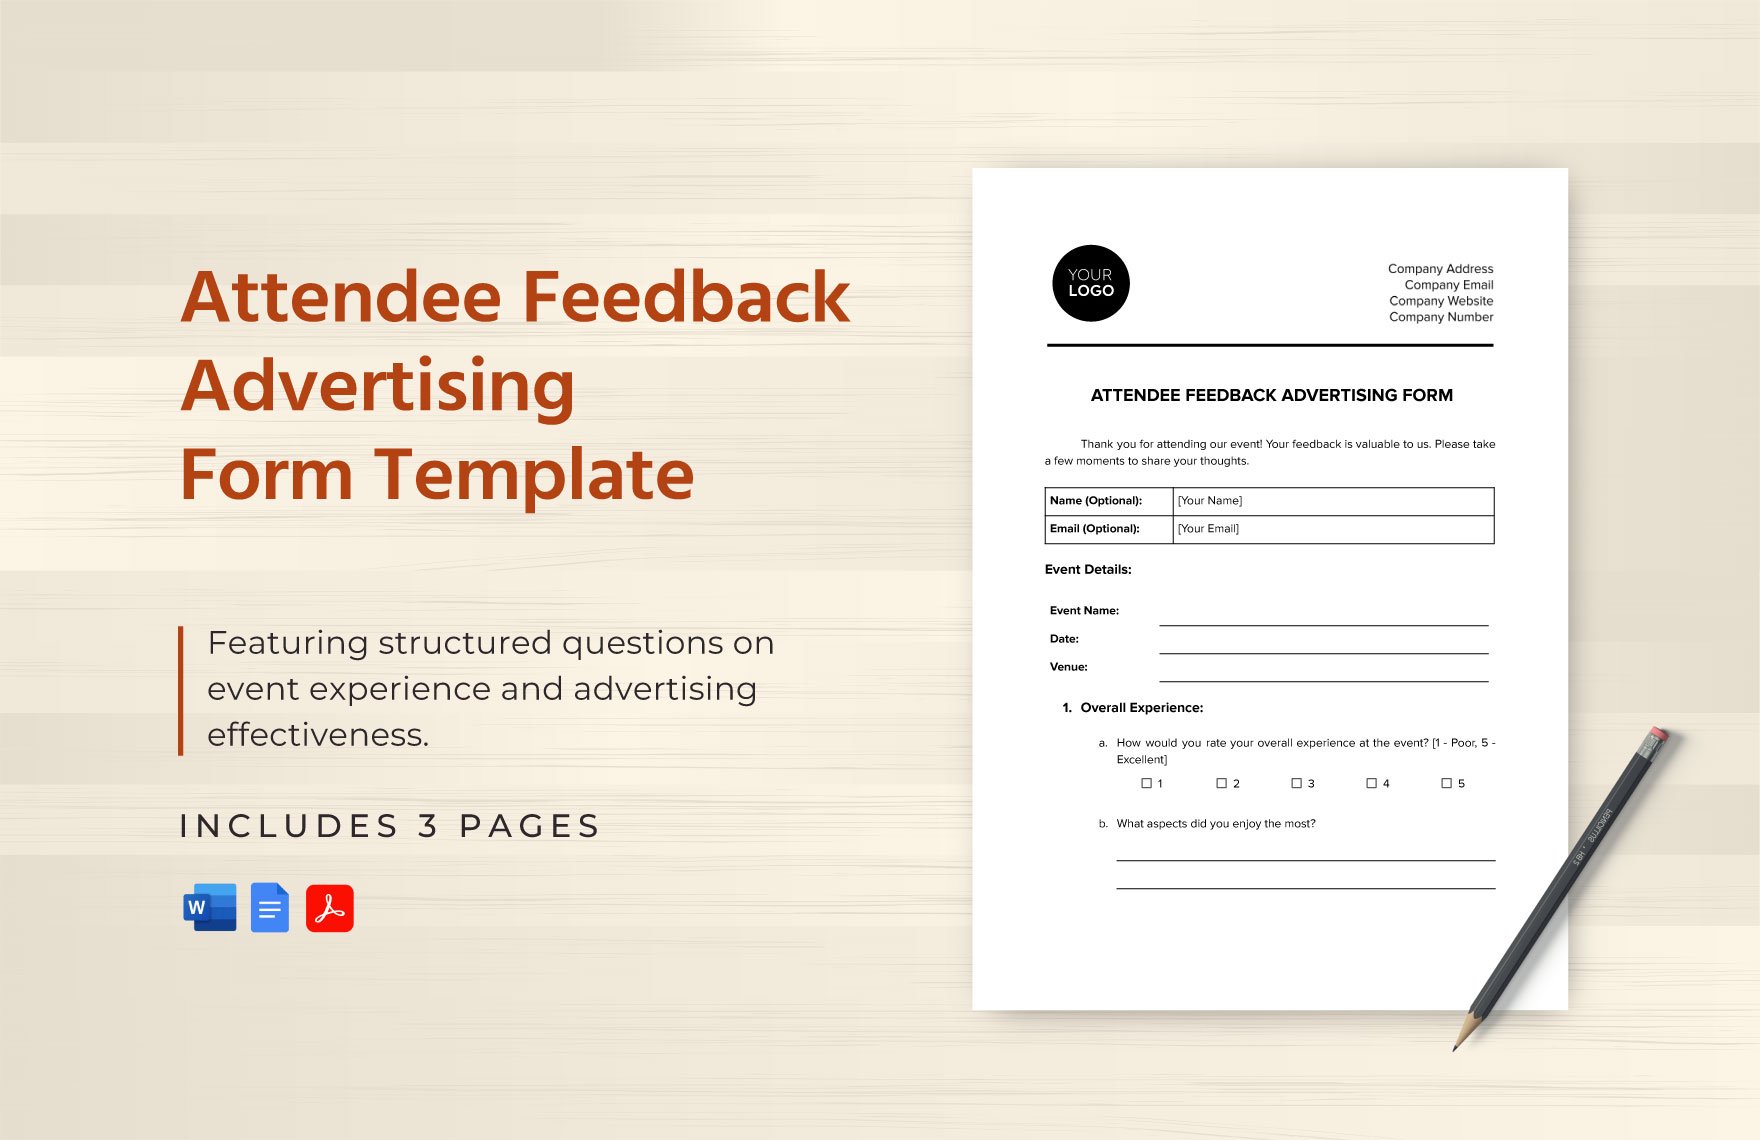 Attendee Feedback Advertising Form Template in Word, Google Docs, PDF